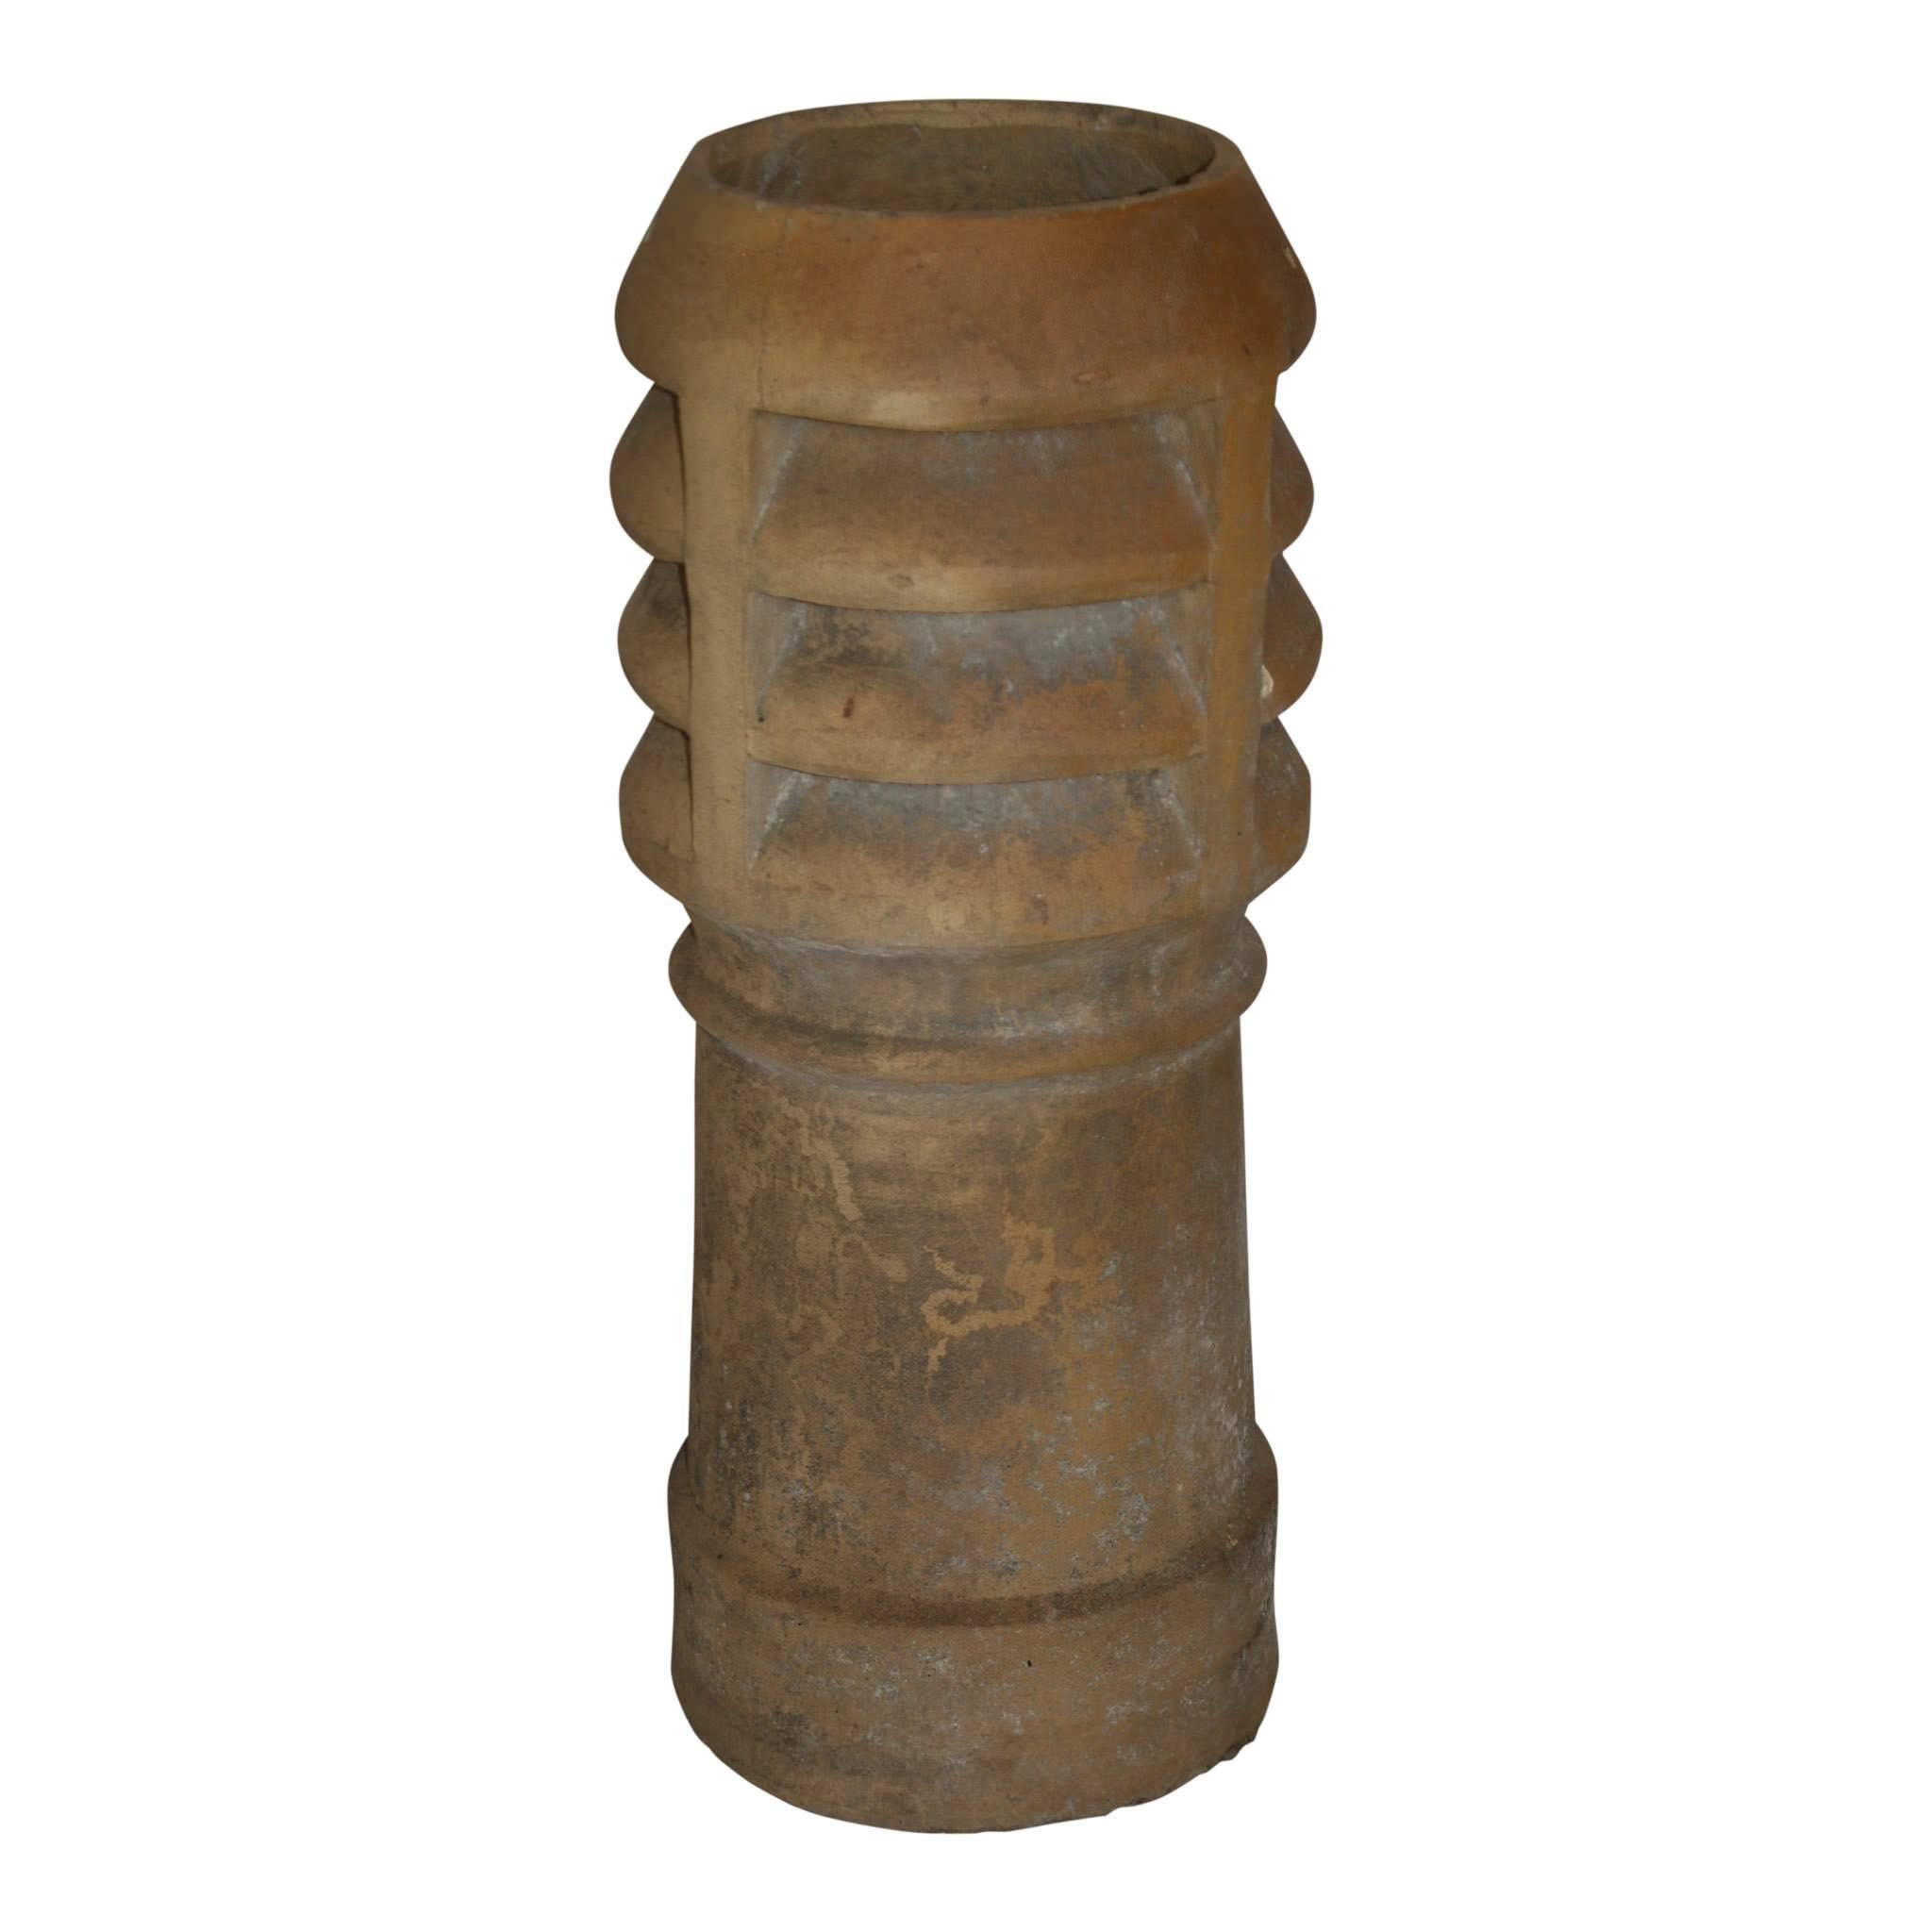 Originally used to help draw smoke up a chimney, this chimney pot with its louvered top makes a stunning architectural piece for garden or porch.